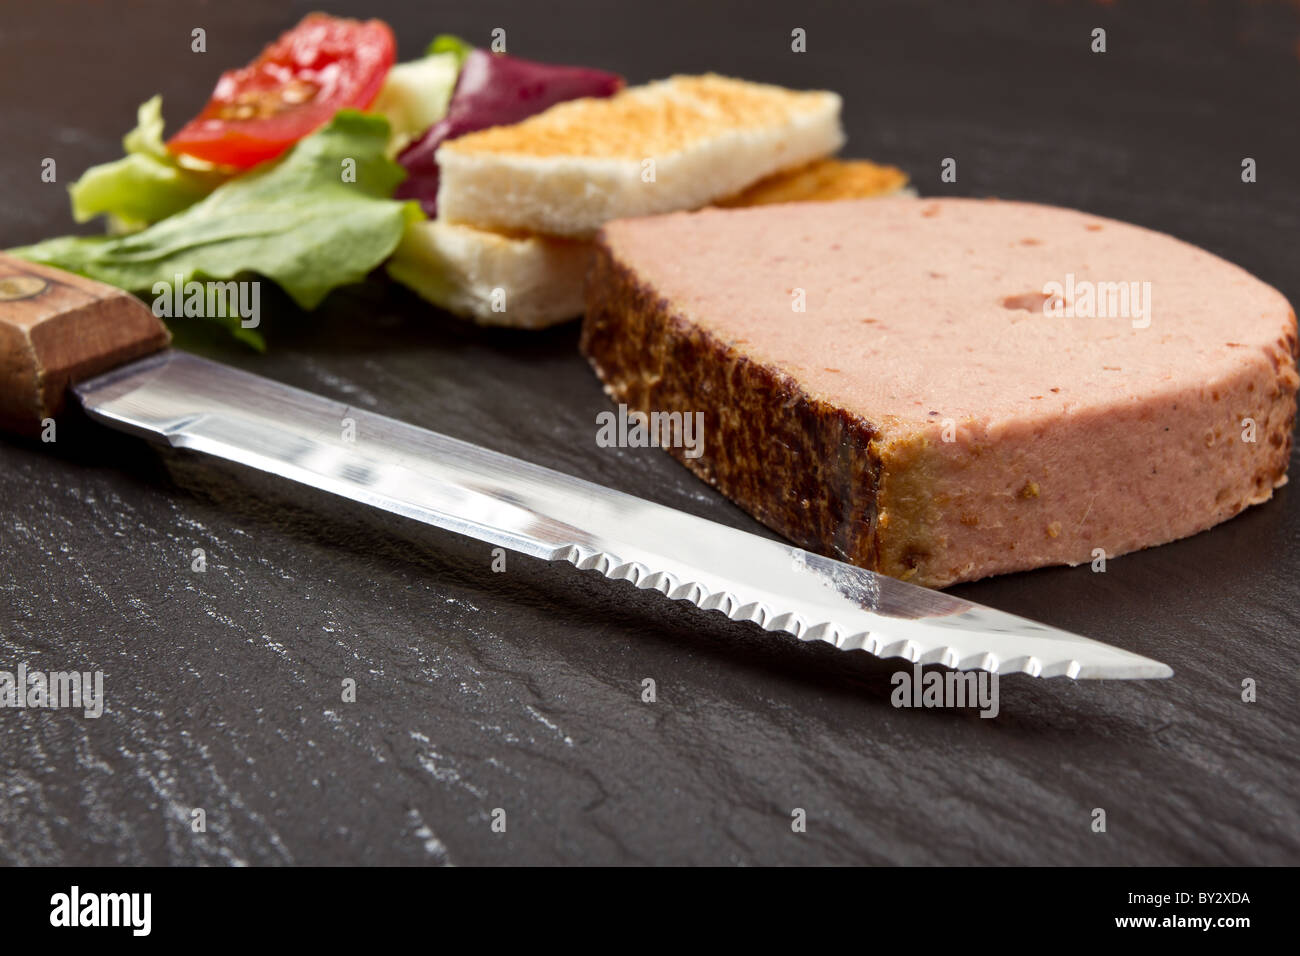 Pate Apetiser with melba toast soldiers and small salad on dark slate background. Stock Photo